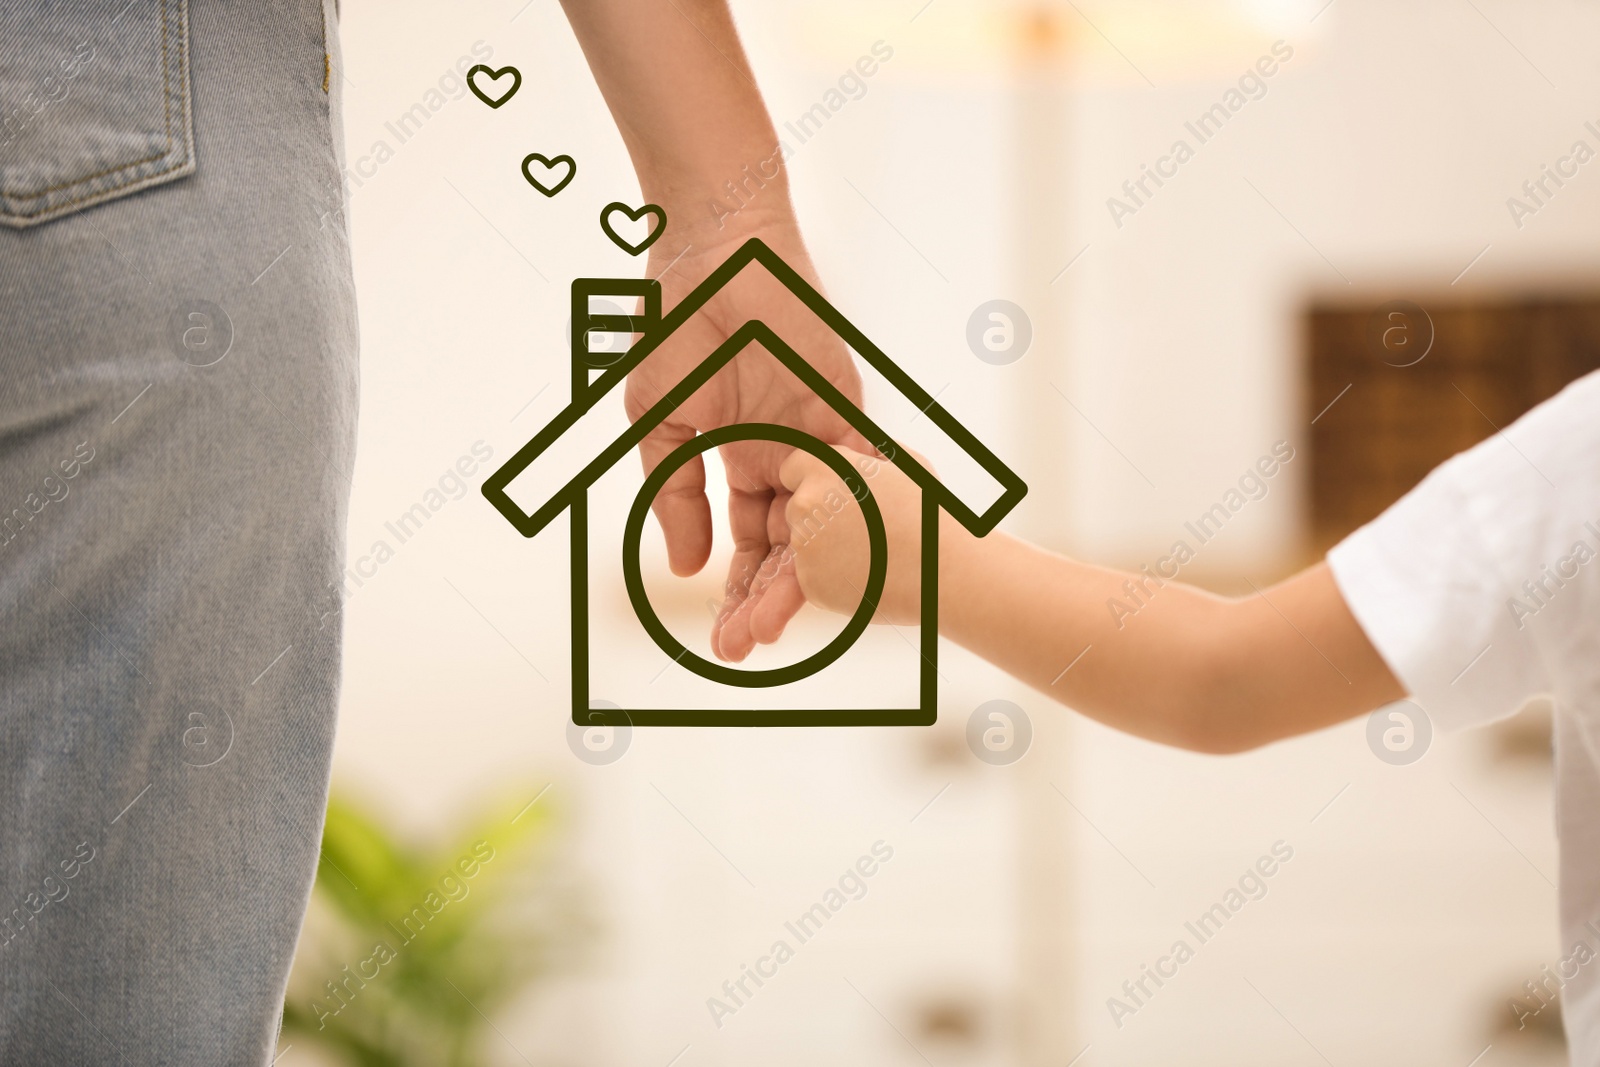 Image of Mother holding hands with child and illustration of house indoors, closeup. Adoption concept